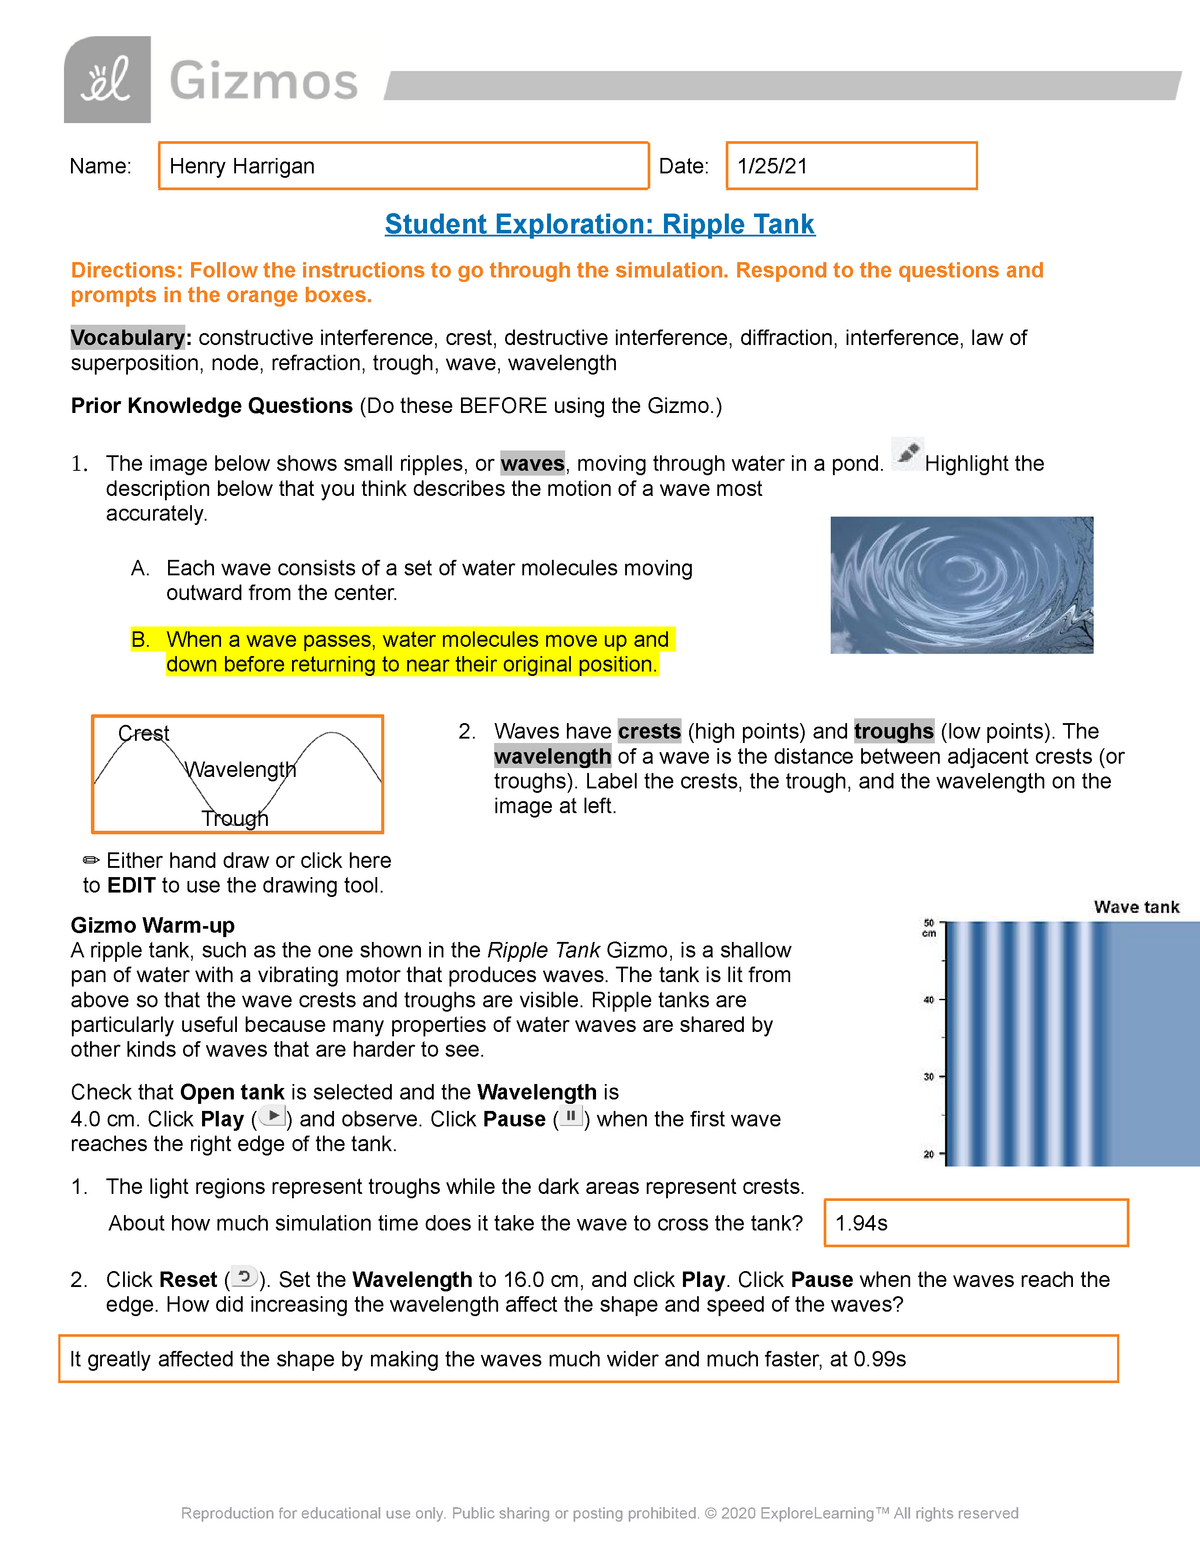 Physical Science Ripple Tank Gizmo Assignment - HSC22 - StuDocu With Worksheet Labeling Waves Answer Key